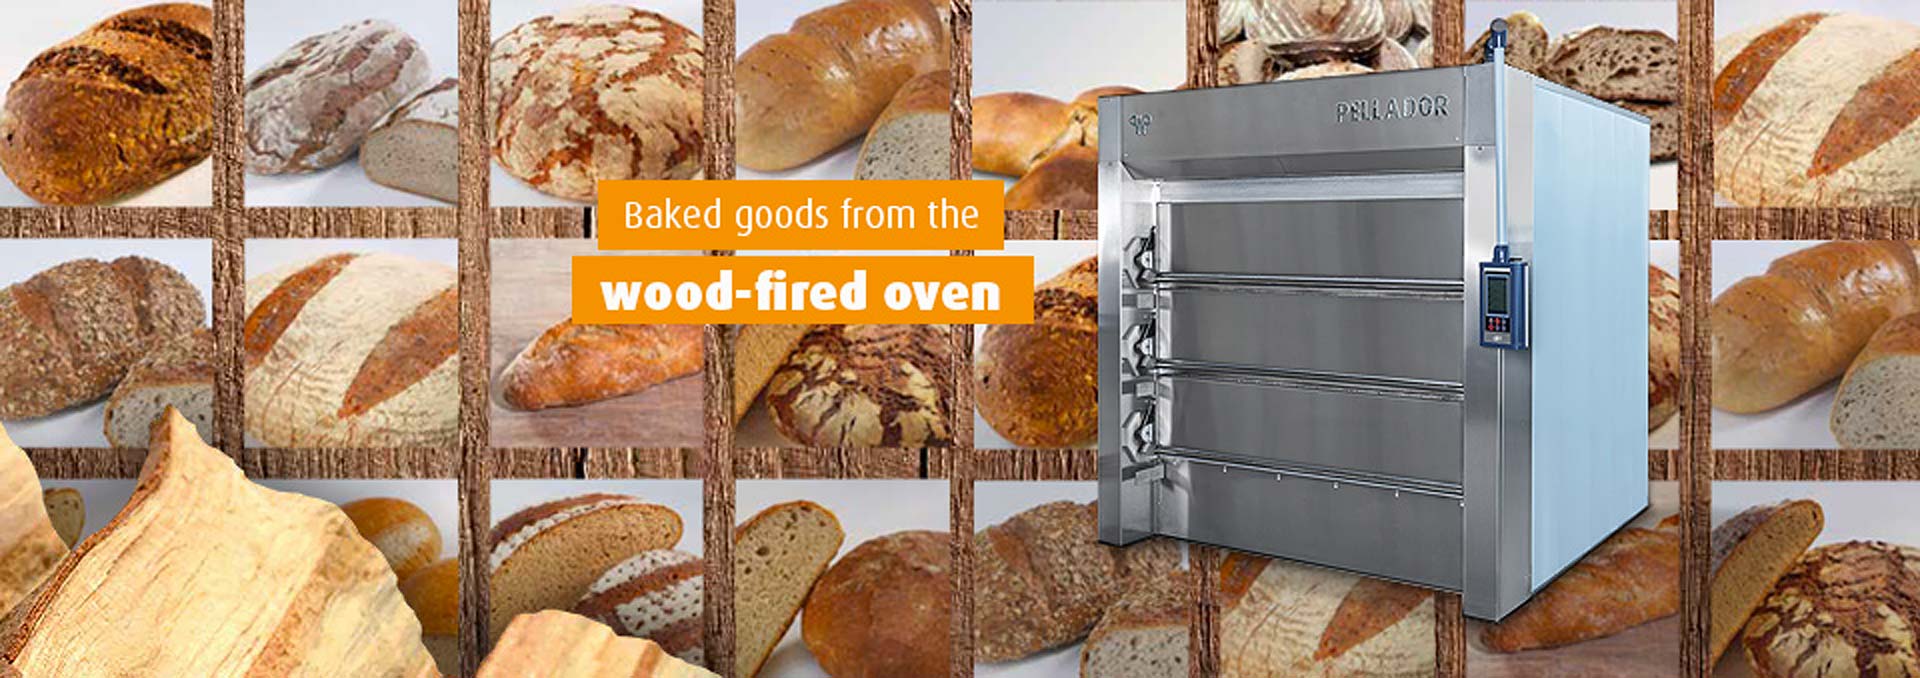 WP L Pellador Wood Burning Deck Oven, WP Bakery Group USA, Retail, Wholesale and Industrial Bakery Equipment and Food Service Industry Equipment, Shelton, CT USA